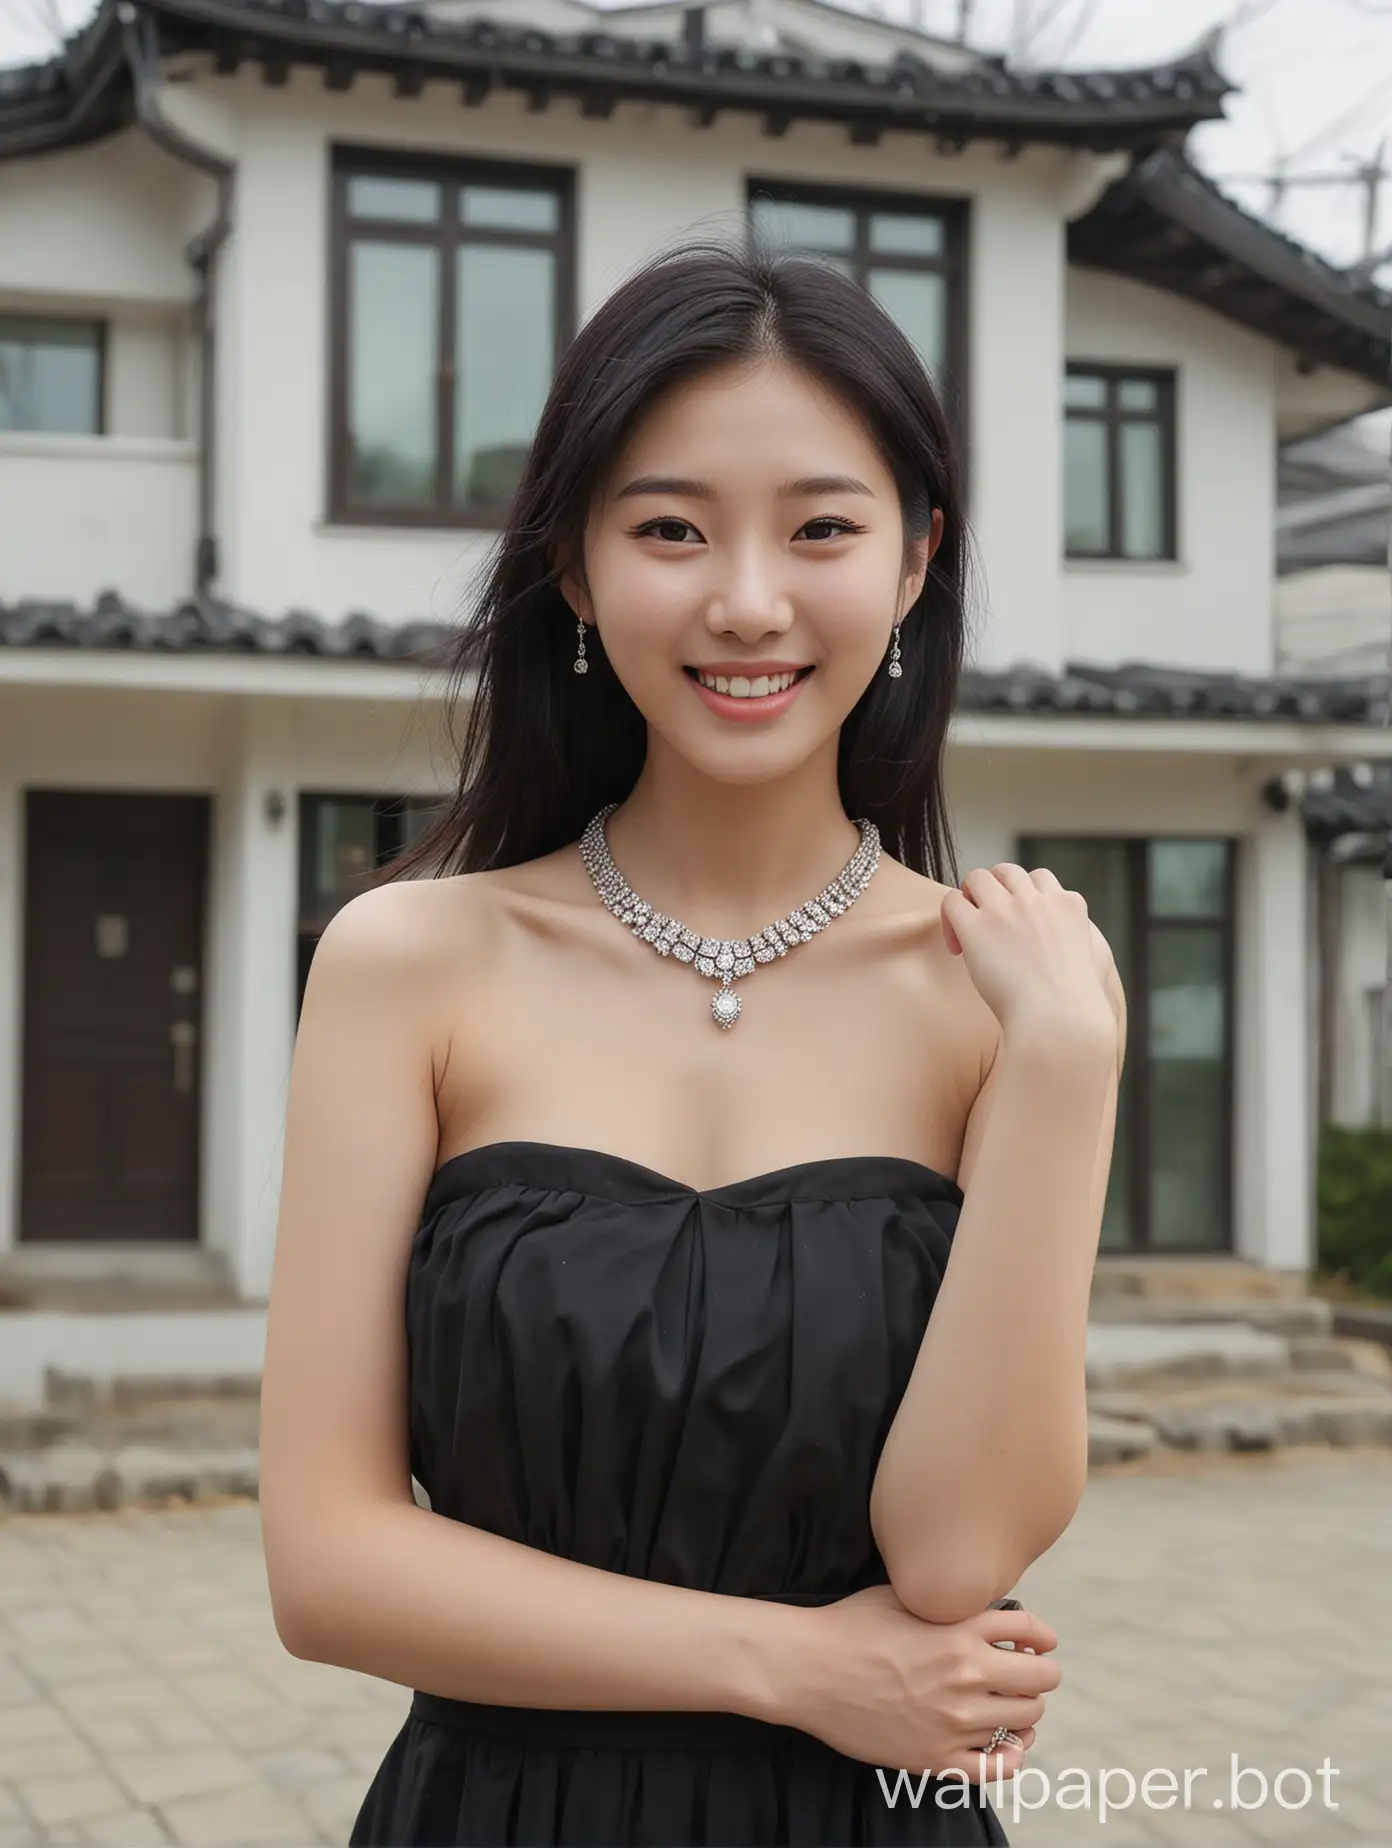 Generate an image of a beautiful south Korea Gyeonggi-dol cute pretty girl big tits , A-line Dress with a fair skin tone and long hair black. She has a Joyful Smile A warm, broad smile that conveys happiness. The background is a modern house.  The camera shot captures her from head to foot full shot. She is wearing Elegant Diamond Necklace The actress wears a stunning diamond necklace at a formal event, exuding glamour..